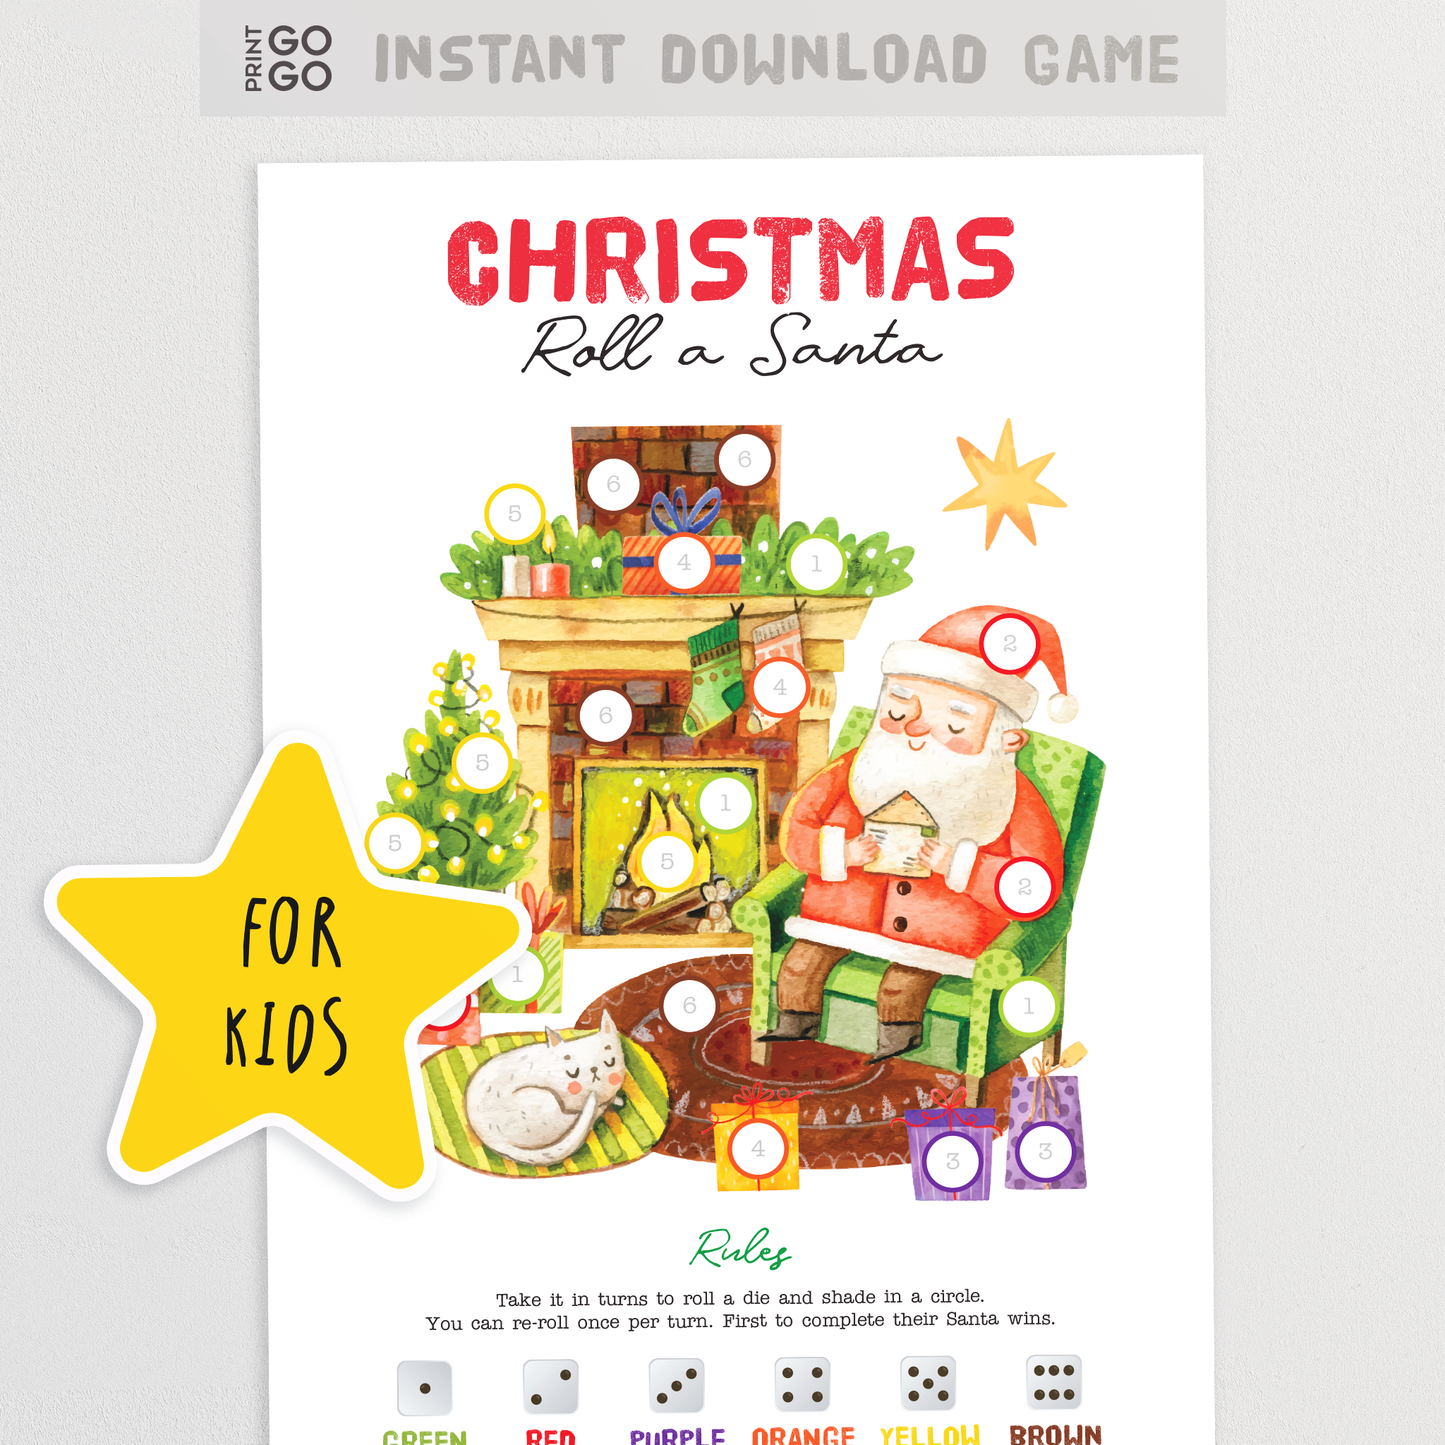 Roll Santa Christmas Dice Game - The Fun Holiday Party Game for Kids